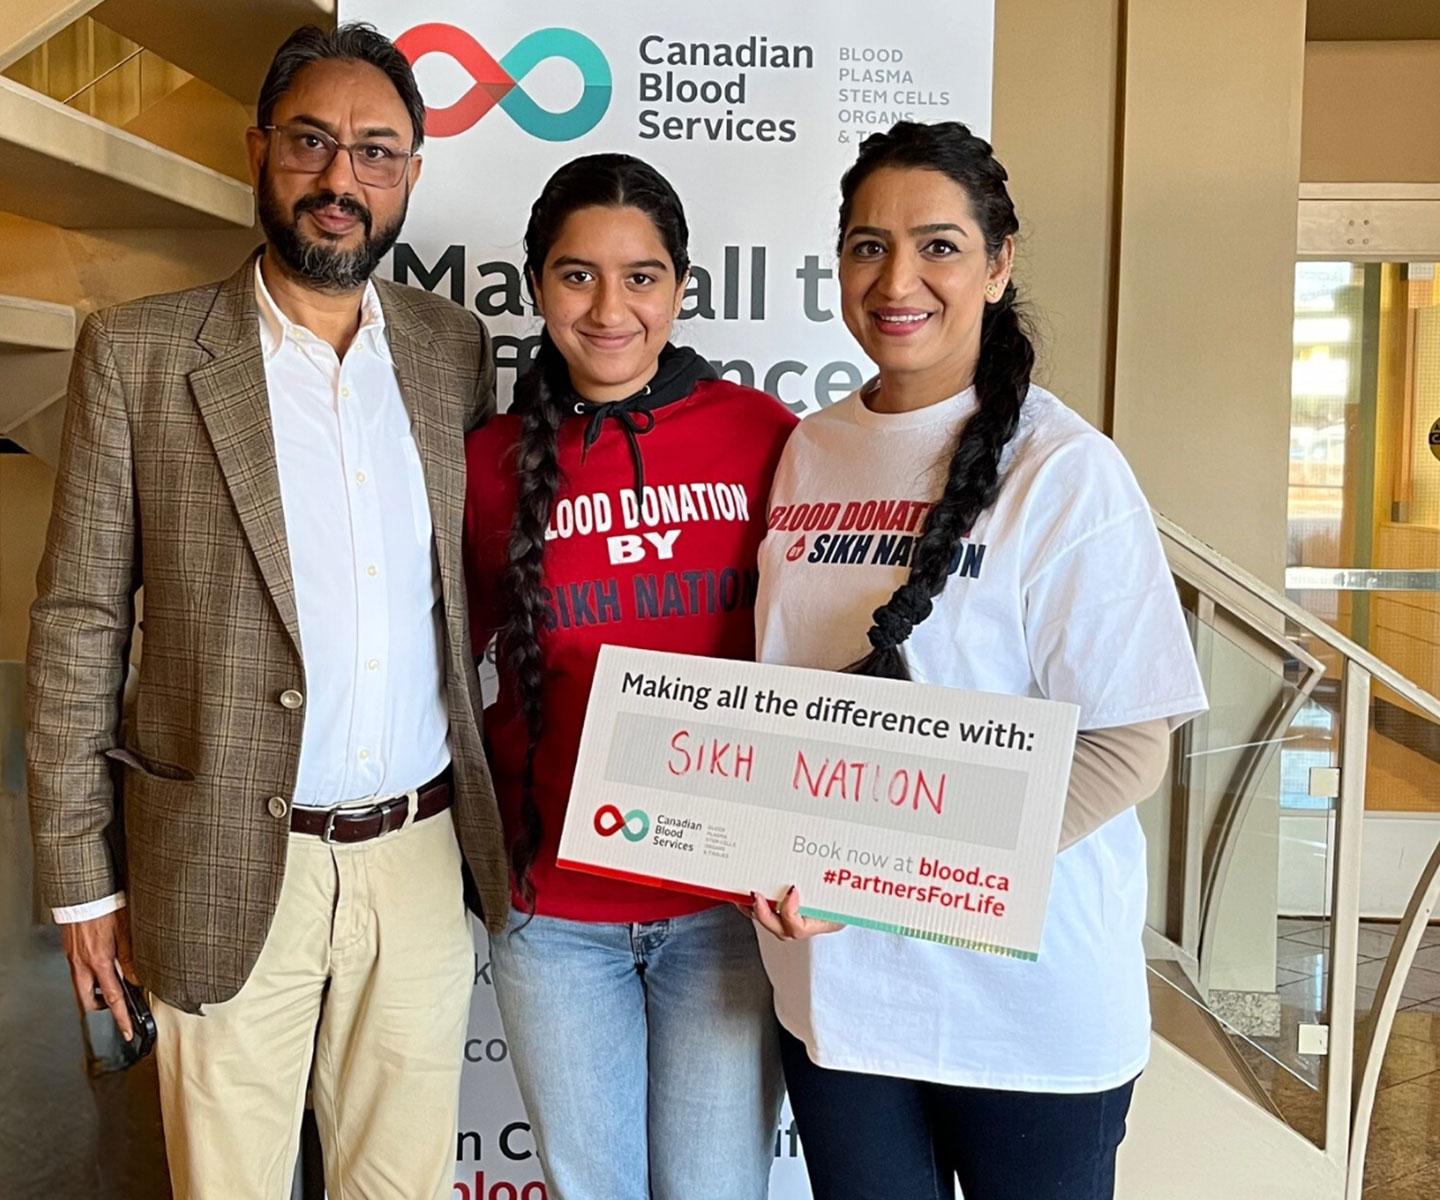 Family of three stand together holding a sign that says Making all the difference with: Sikh Nation. Two of them wear Blood donation by Sikh Nation t-shirts.